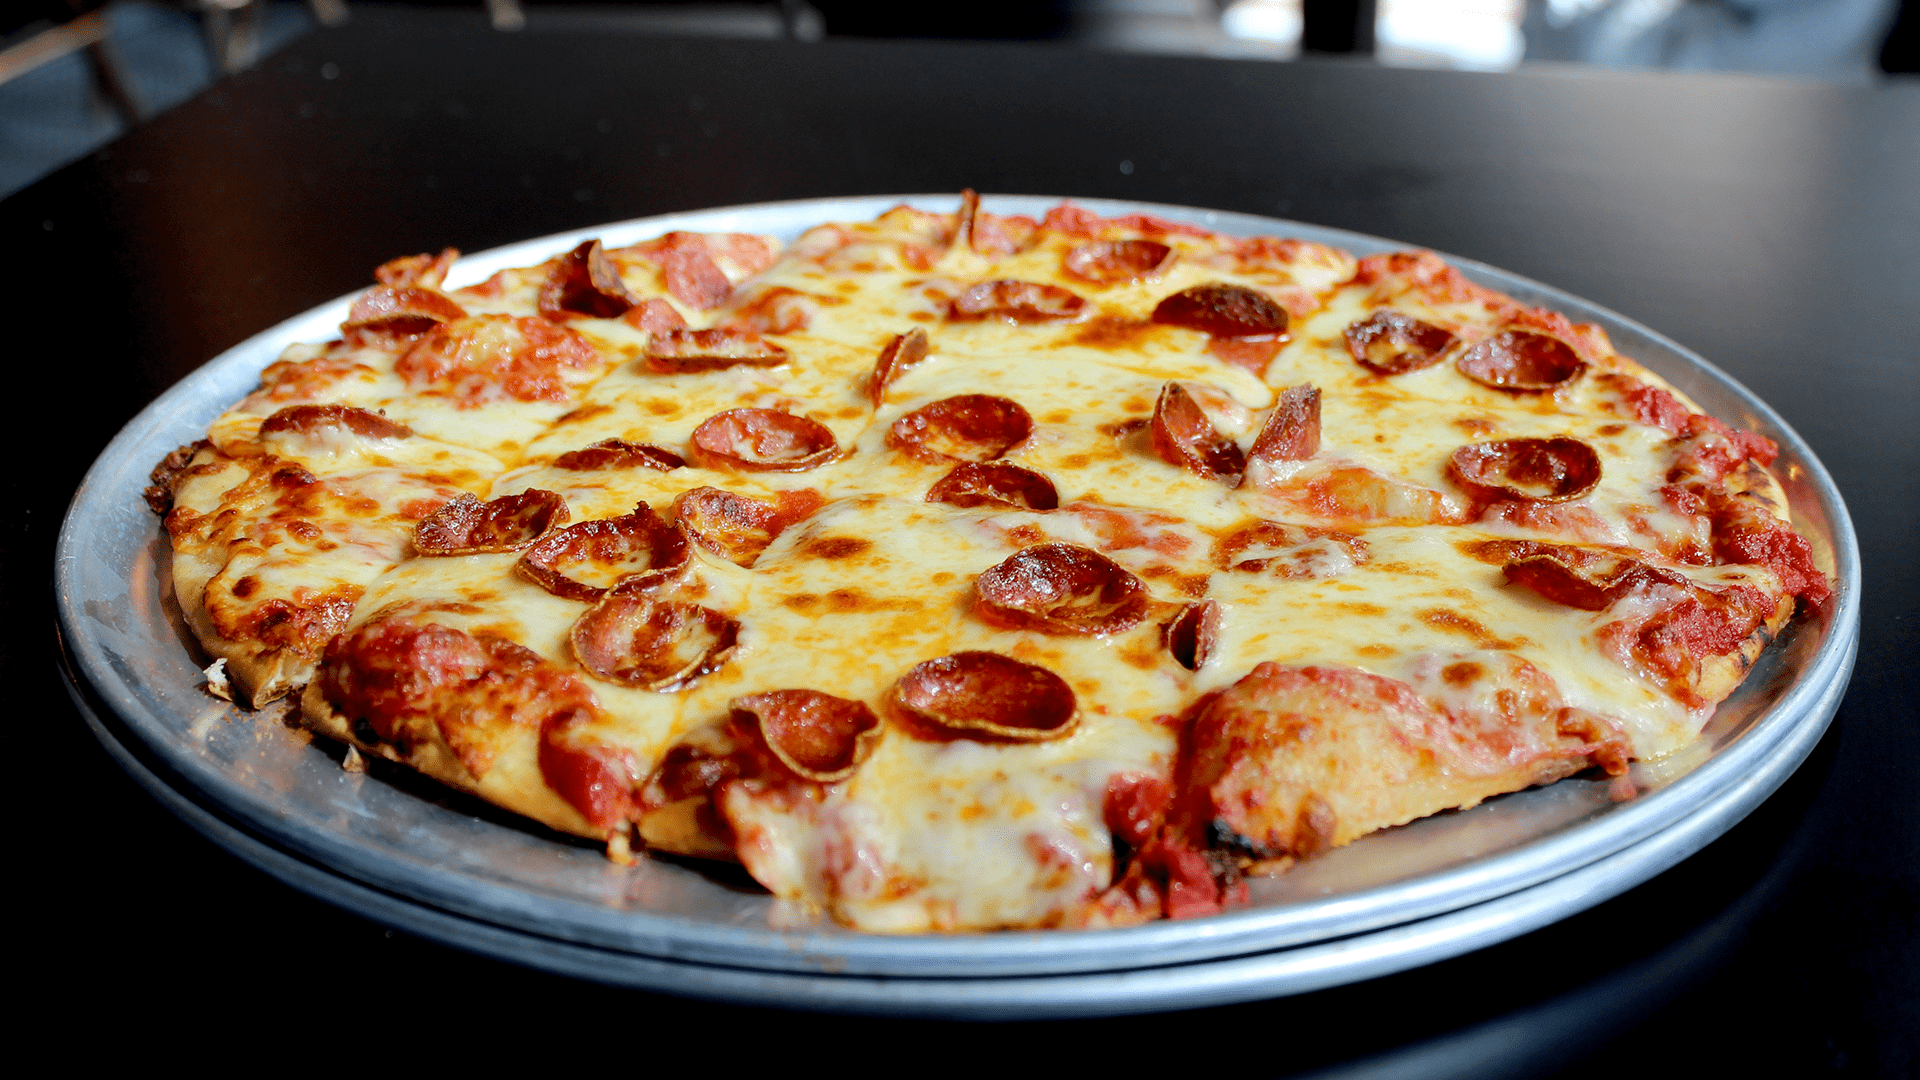 A melty pepperoni pizza on a plate